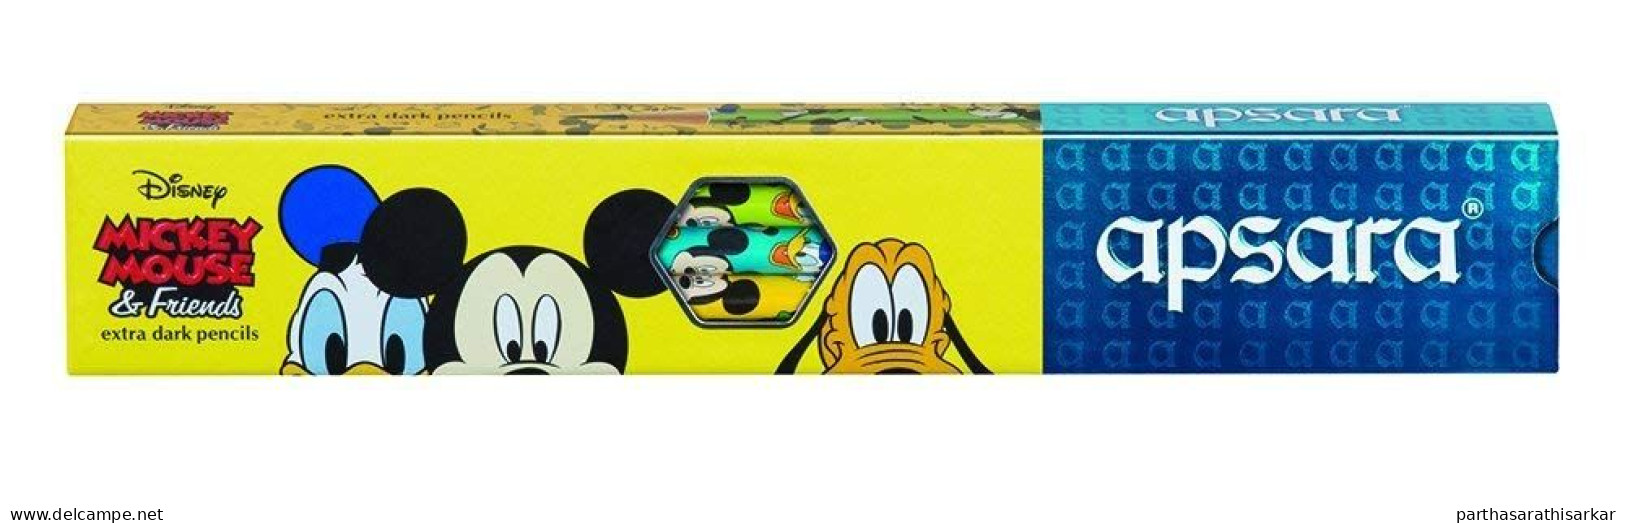 MICKY MOUSE DISNEY PENCILS FROM INDIAN BRAND APSARA SET OF 5 PENCILS (2 SETS IN A PACK) - Seals